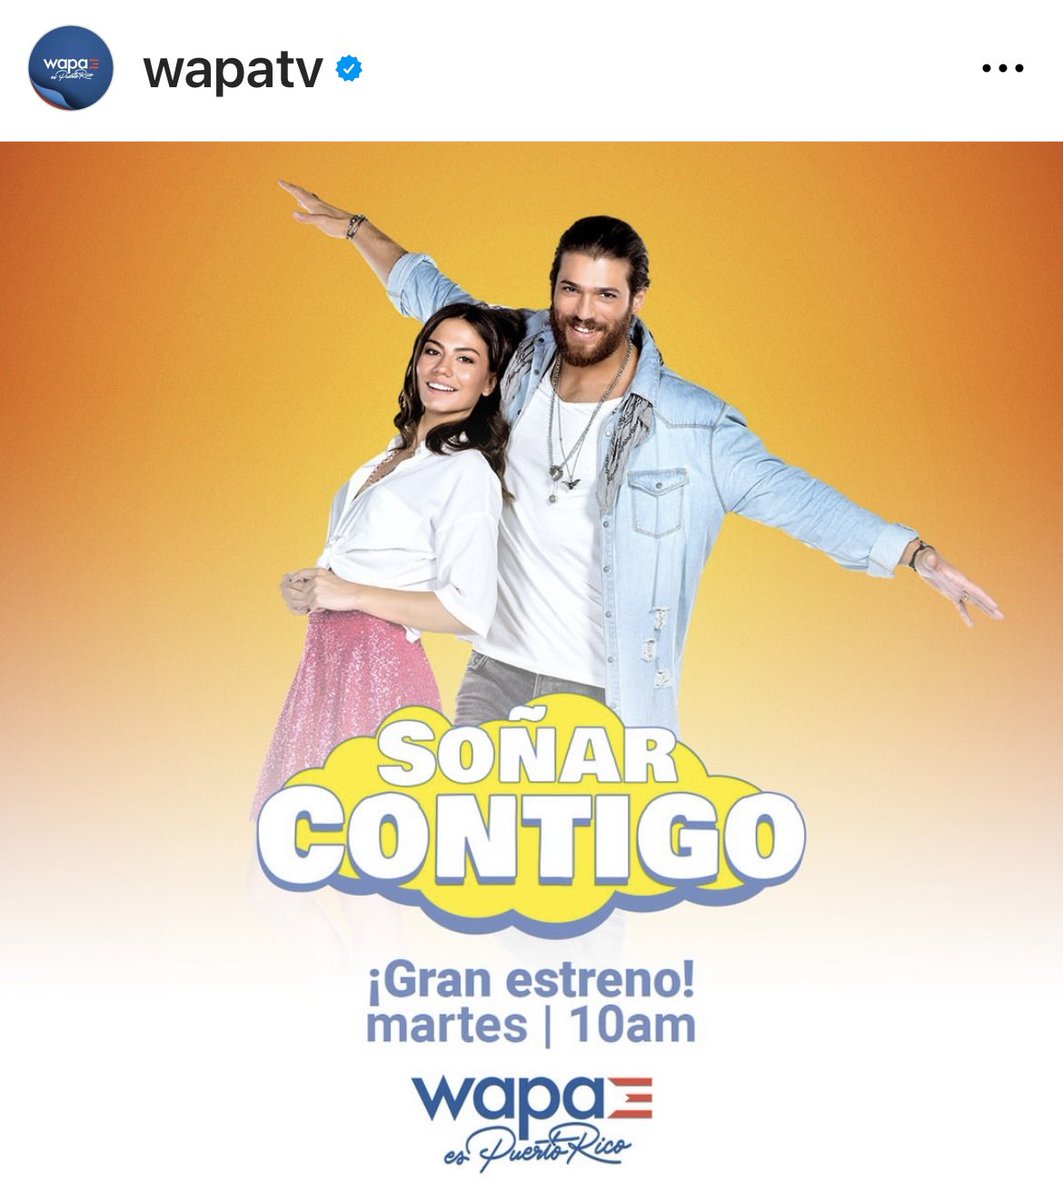 One hour away from the premiere of SoñarContigo (Erkenci Kus- Daydreamer) 
in Puerto Rico 🇵🇷 

Will you be here to celebrate? 

#CanYaman @WapaTV